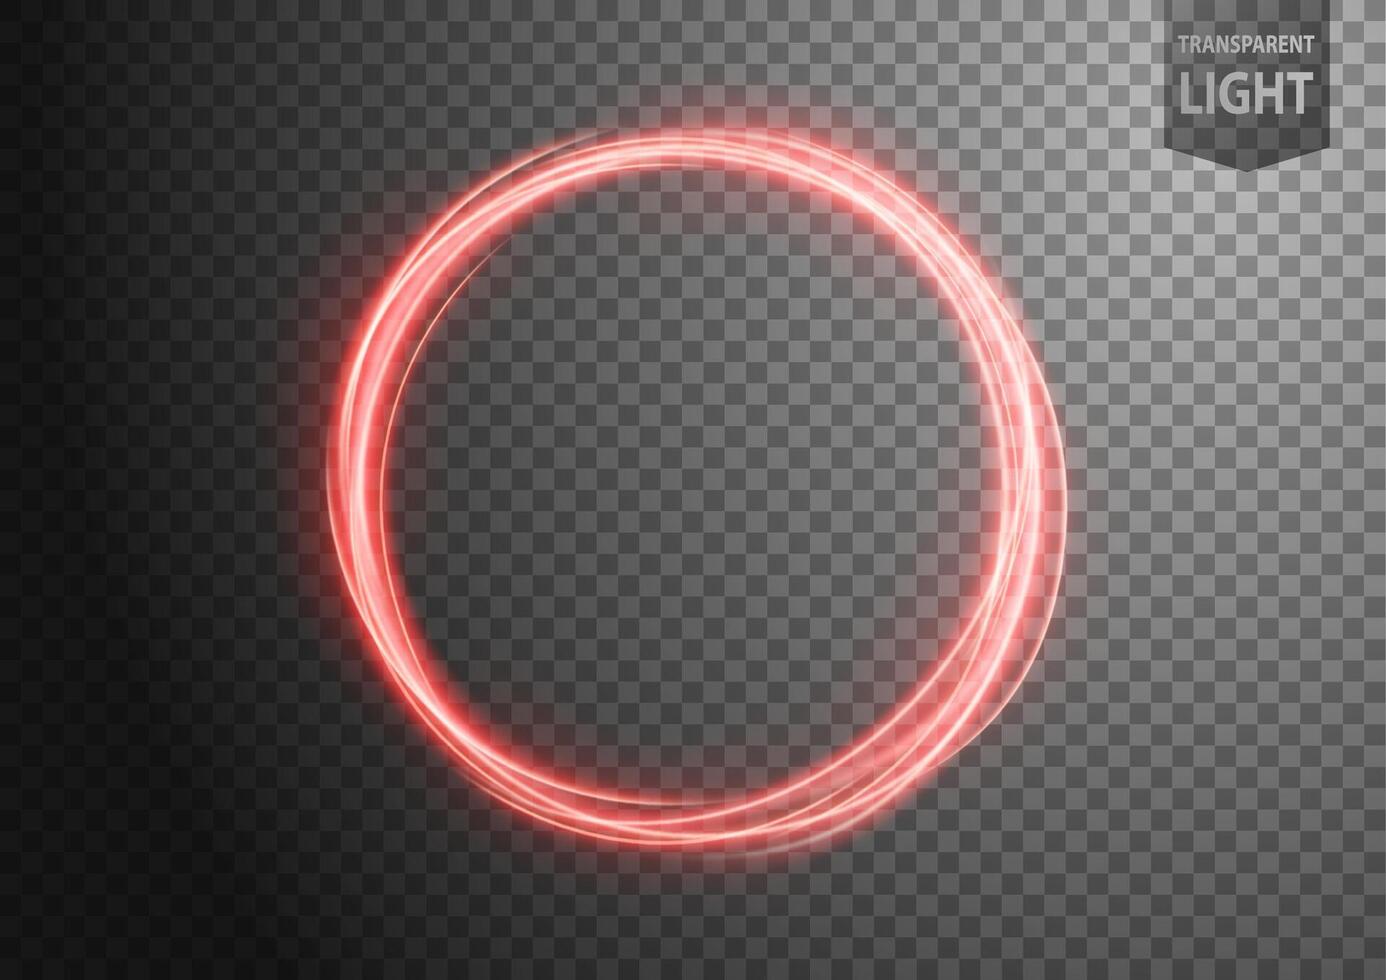 Abstract Red Ring of Light with A Background, Isolated and Easy to Edit, Vector Illustration